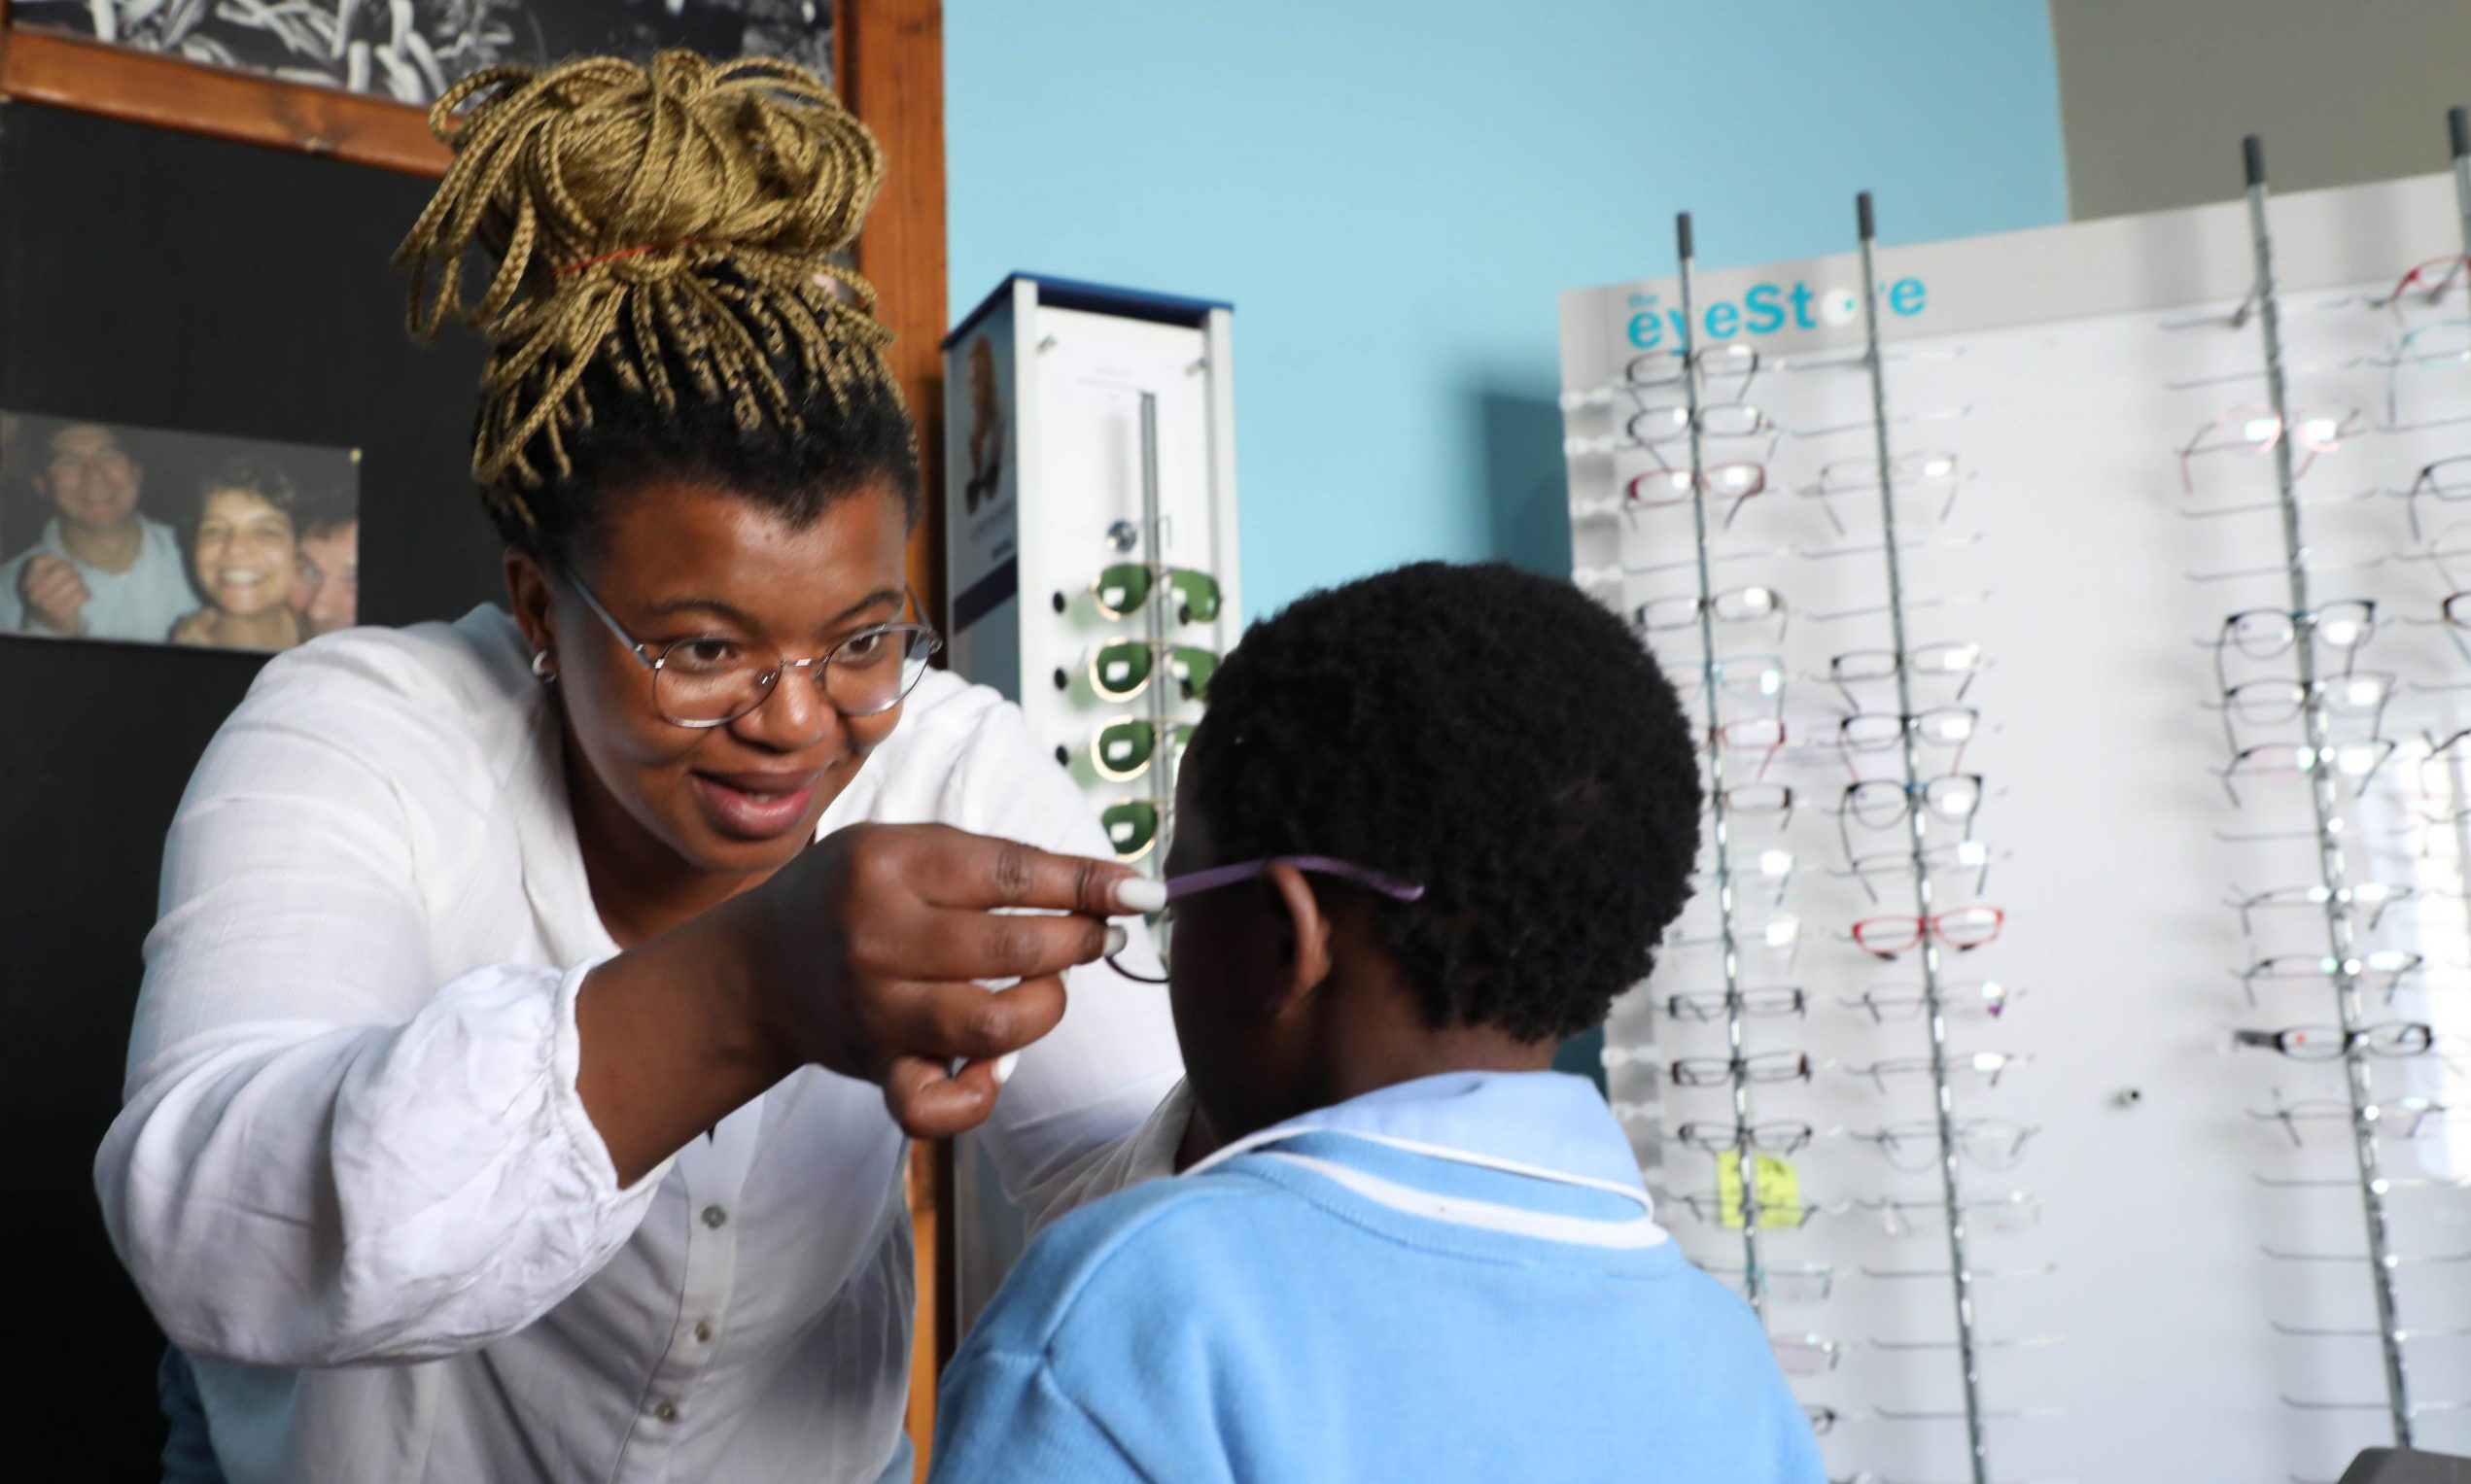 Yamkela Ngxangxeni from Davies Optometrists fits glasses on a child as part of a plan to make sure that all children under 18 have access to glasses if they need them. Photo: Jackie Clausen